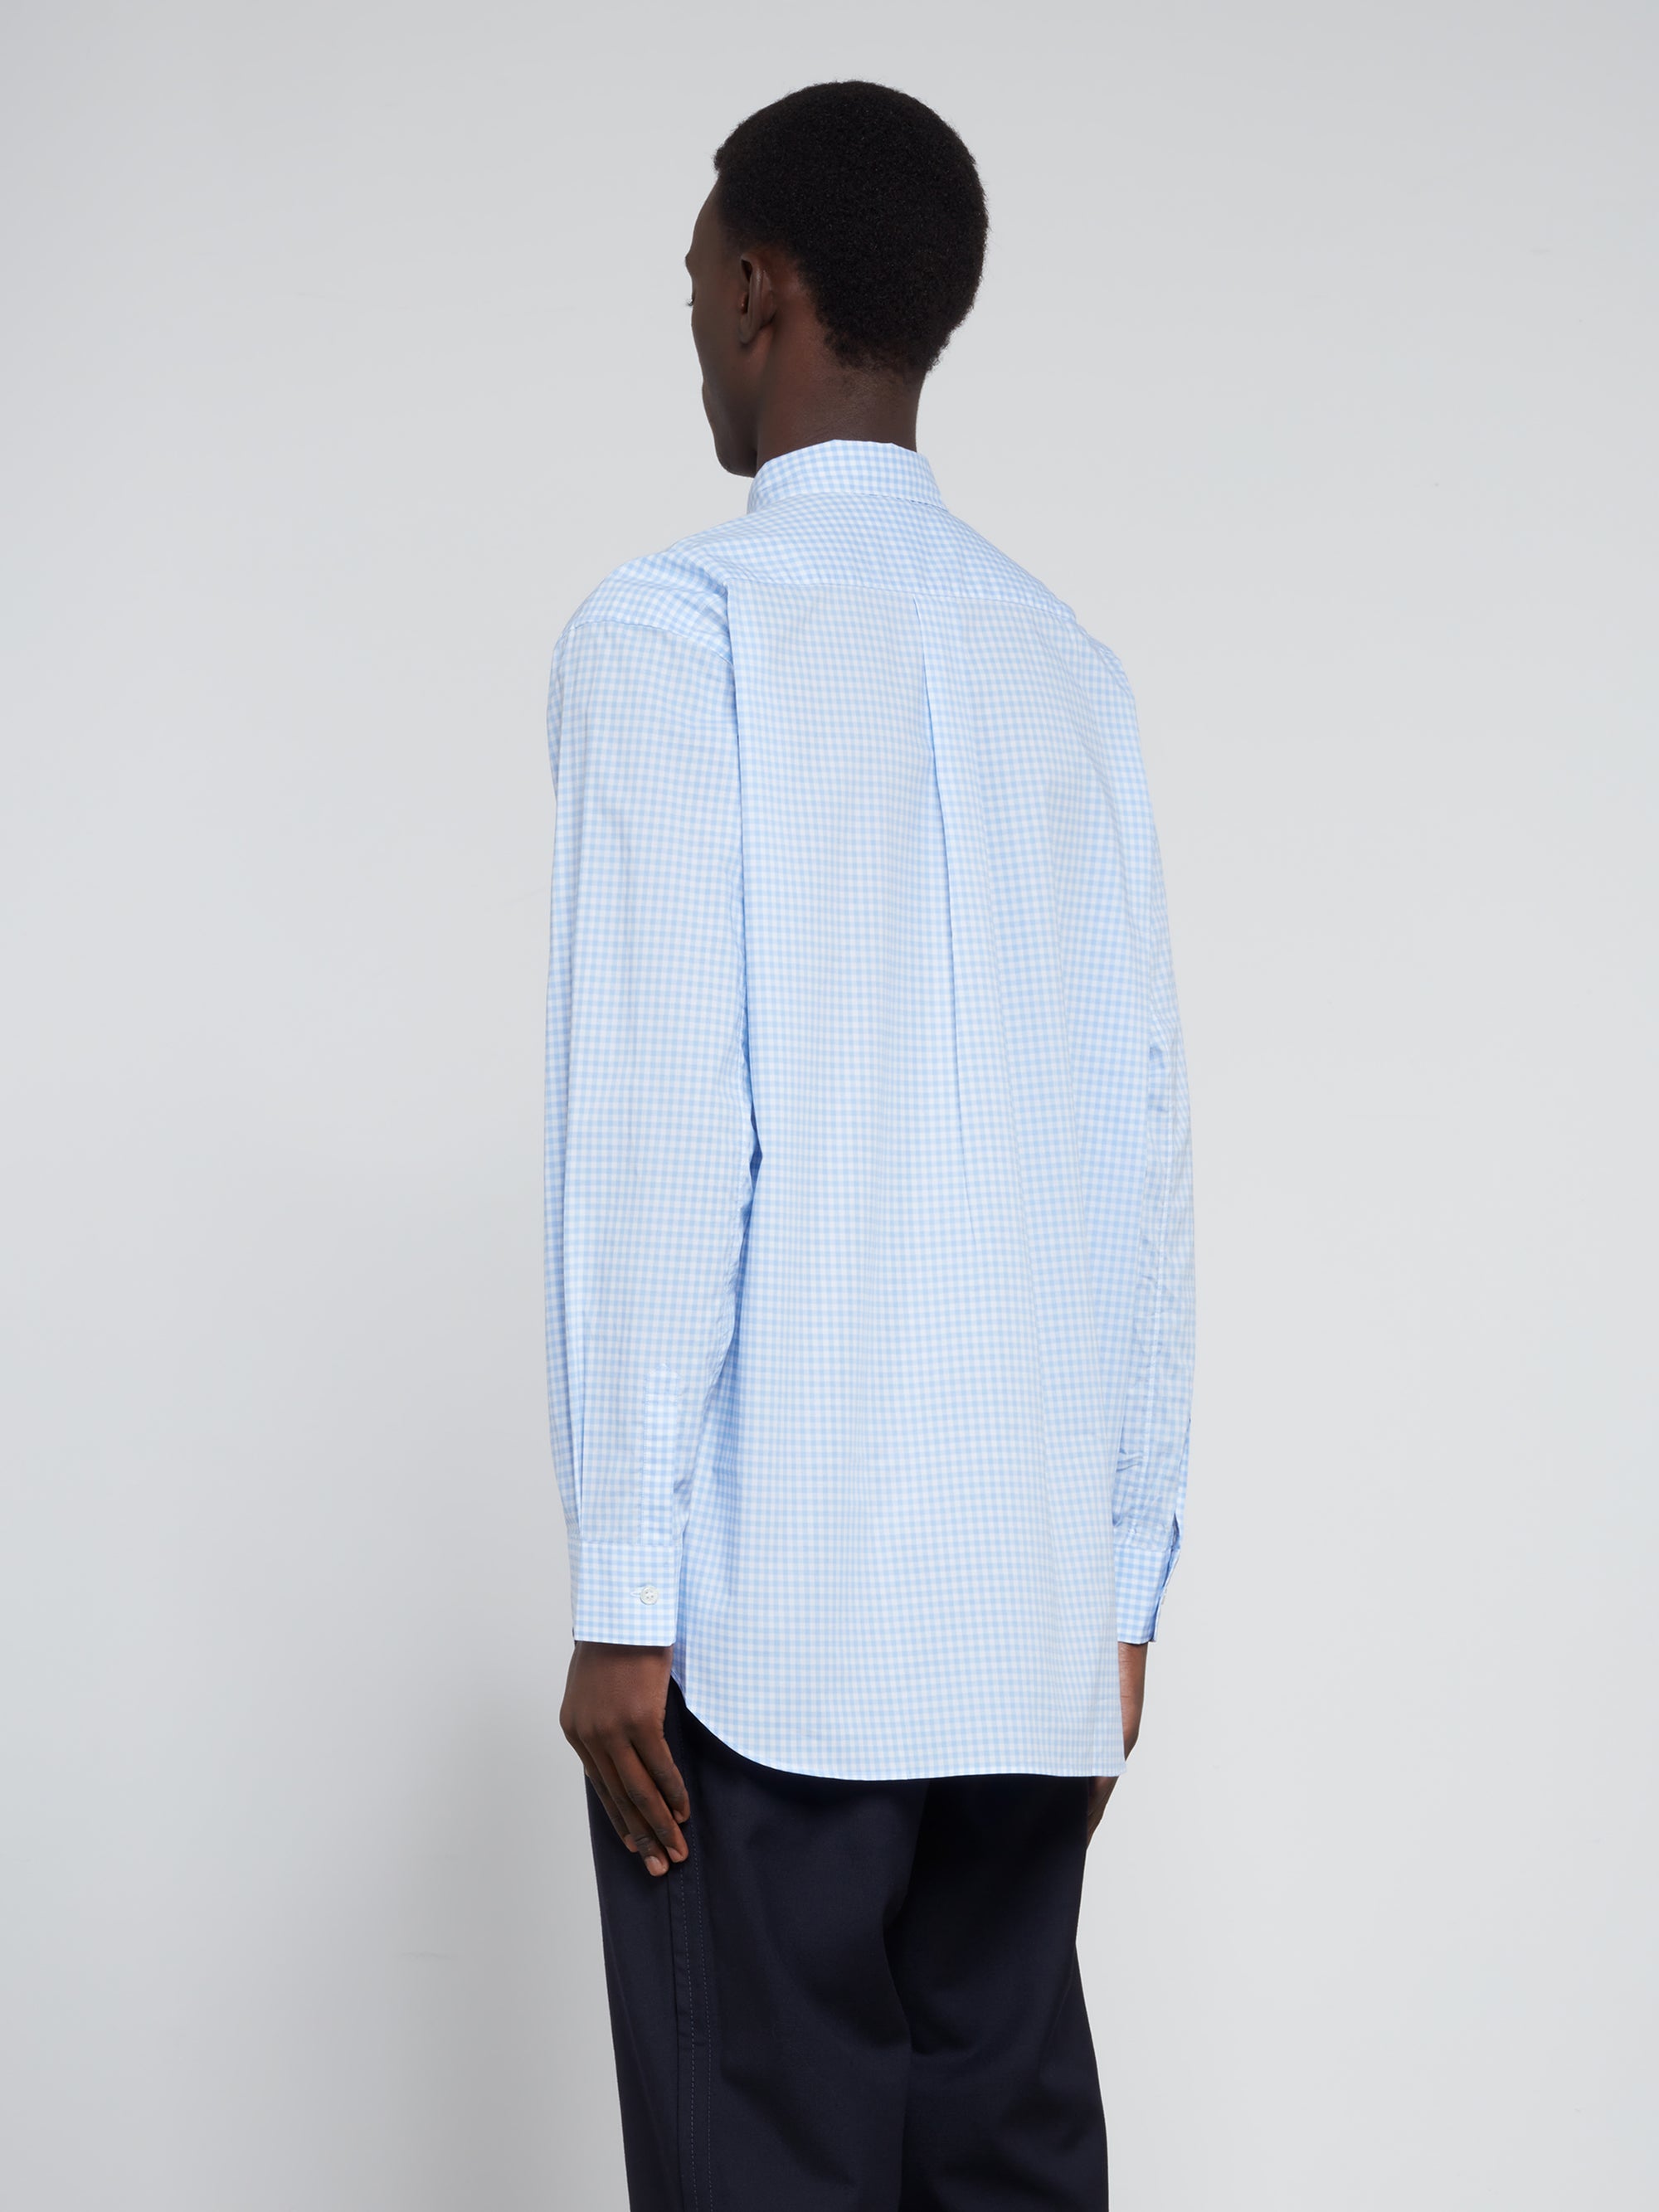 CDG Shirt Forever - Wide Fit Small Check Woven Cotton Shirt - (Blue) view 4